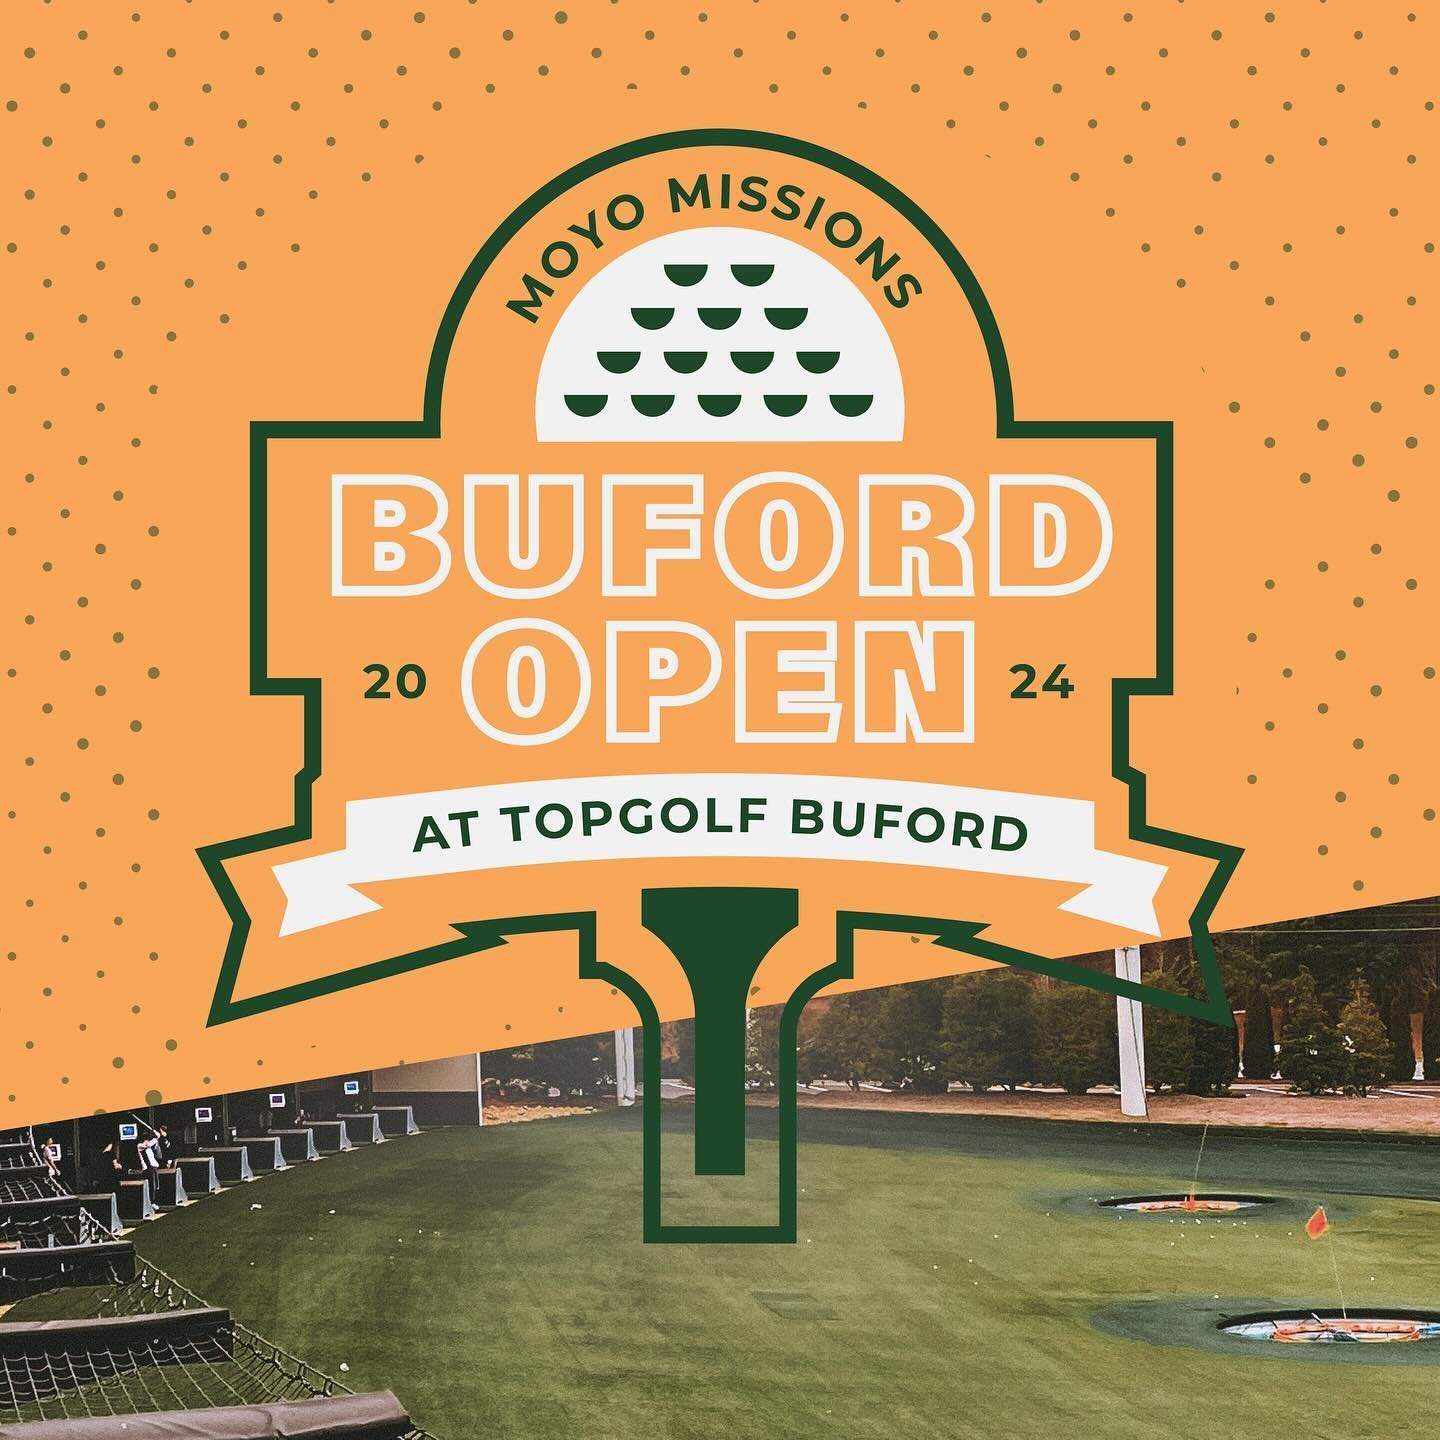 The Topgolf fundraiser is just a little over a week away! It is going to be a fun night that you won&rsquo;t want to miss out on! Good news - there is still time to sign up! ⛳️🏌️&zwj;♂️

Come join us on Thursday, May 2nd, for a high-tech game of gol